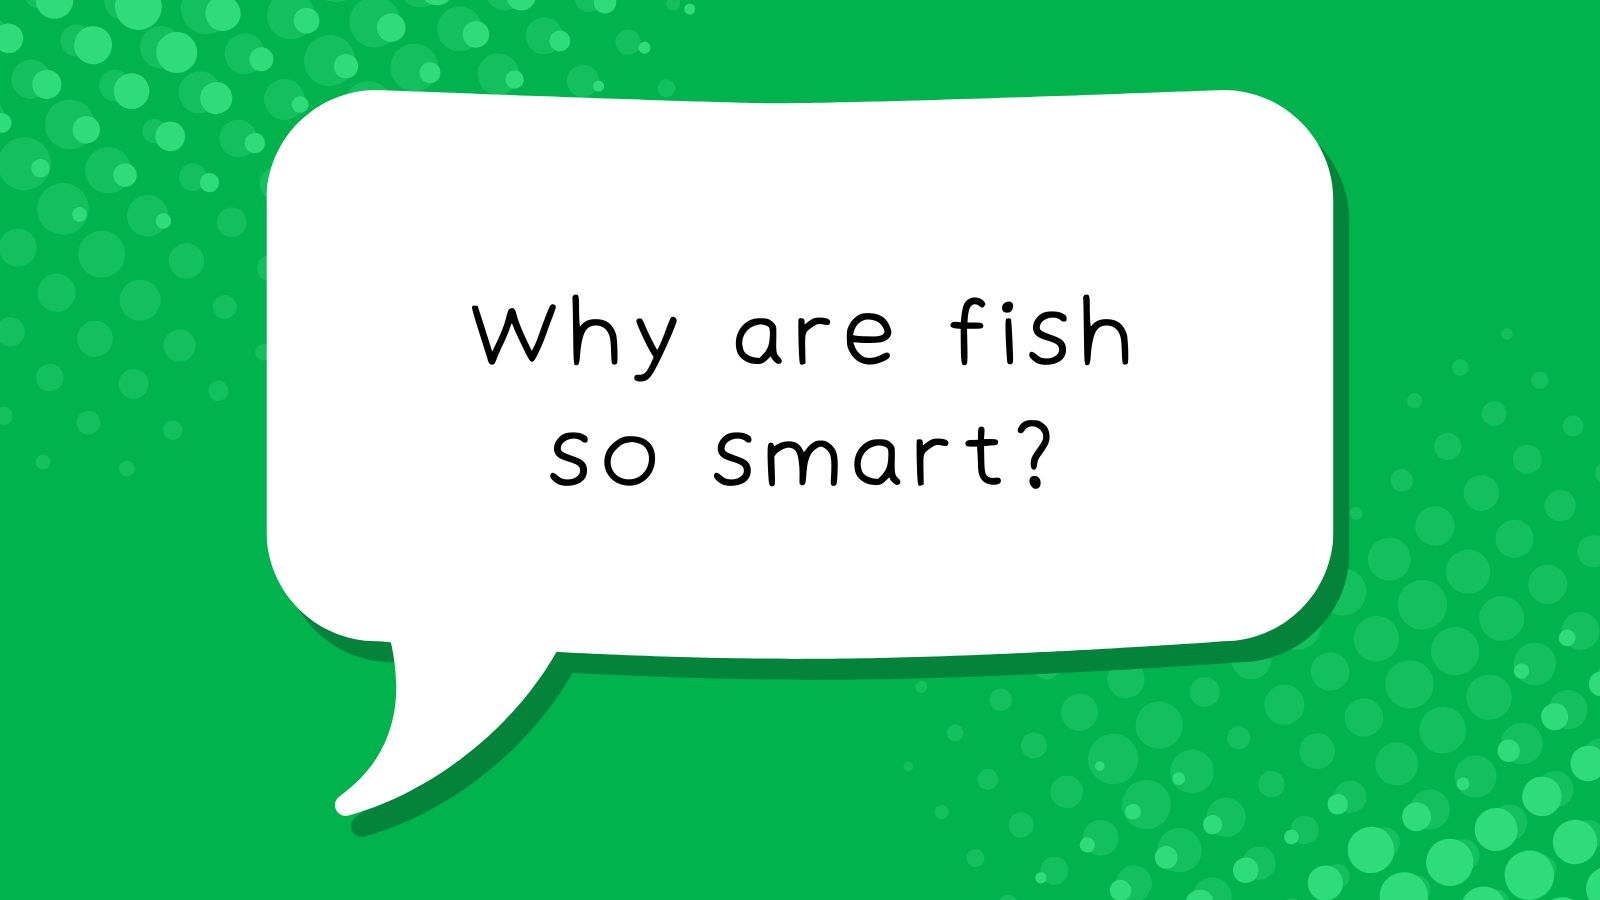 Why are fish so smart?